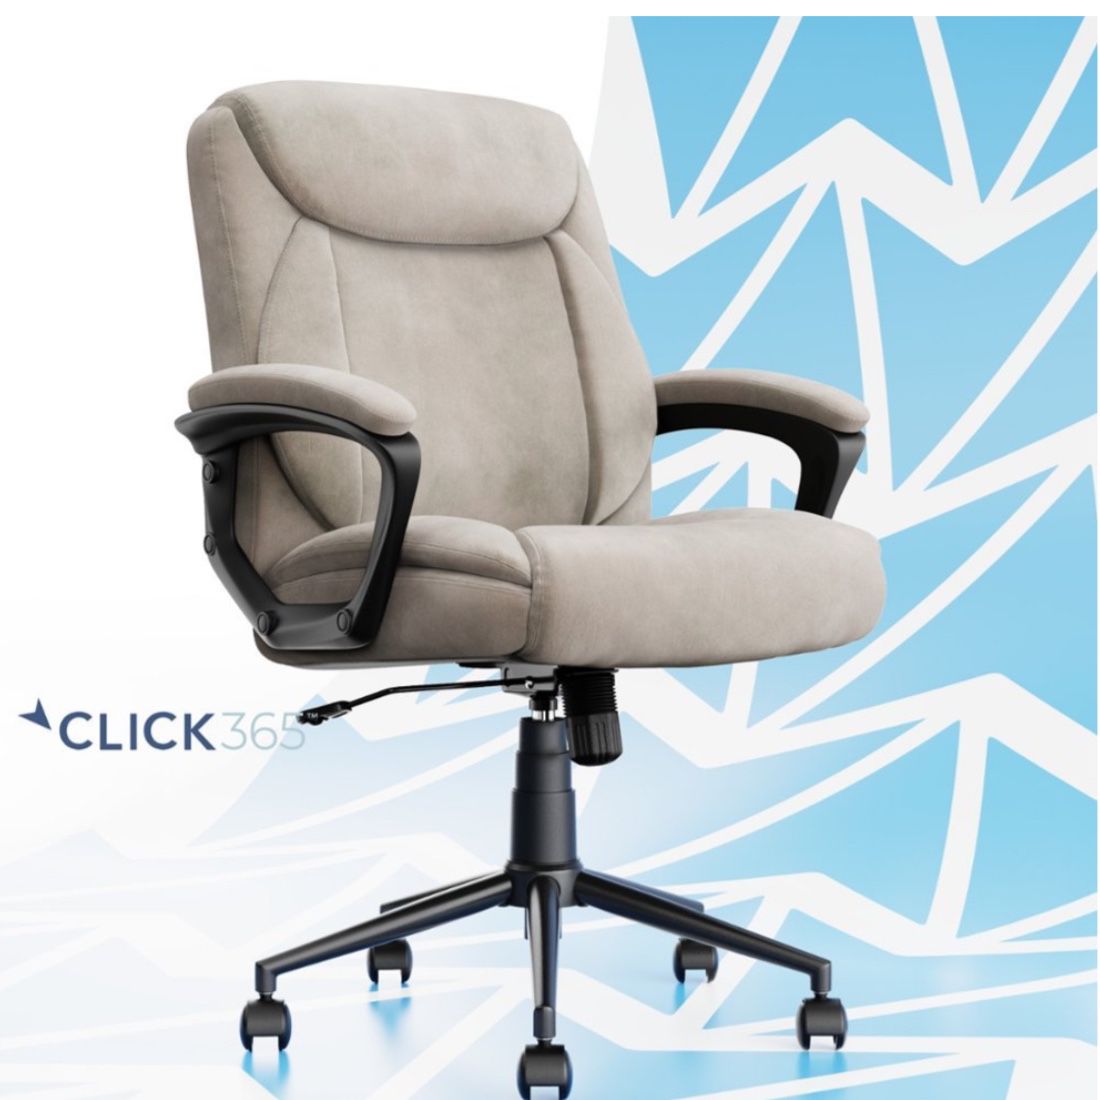  Click365 - Transform 1.0 Upholstered Desk Office Chair - Fabric - Beige #668